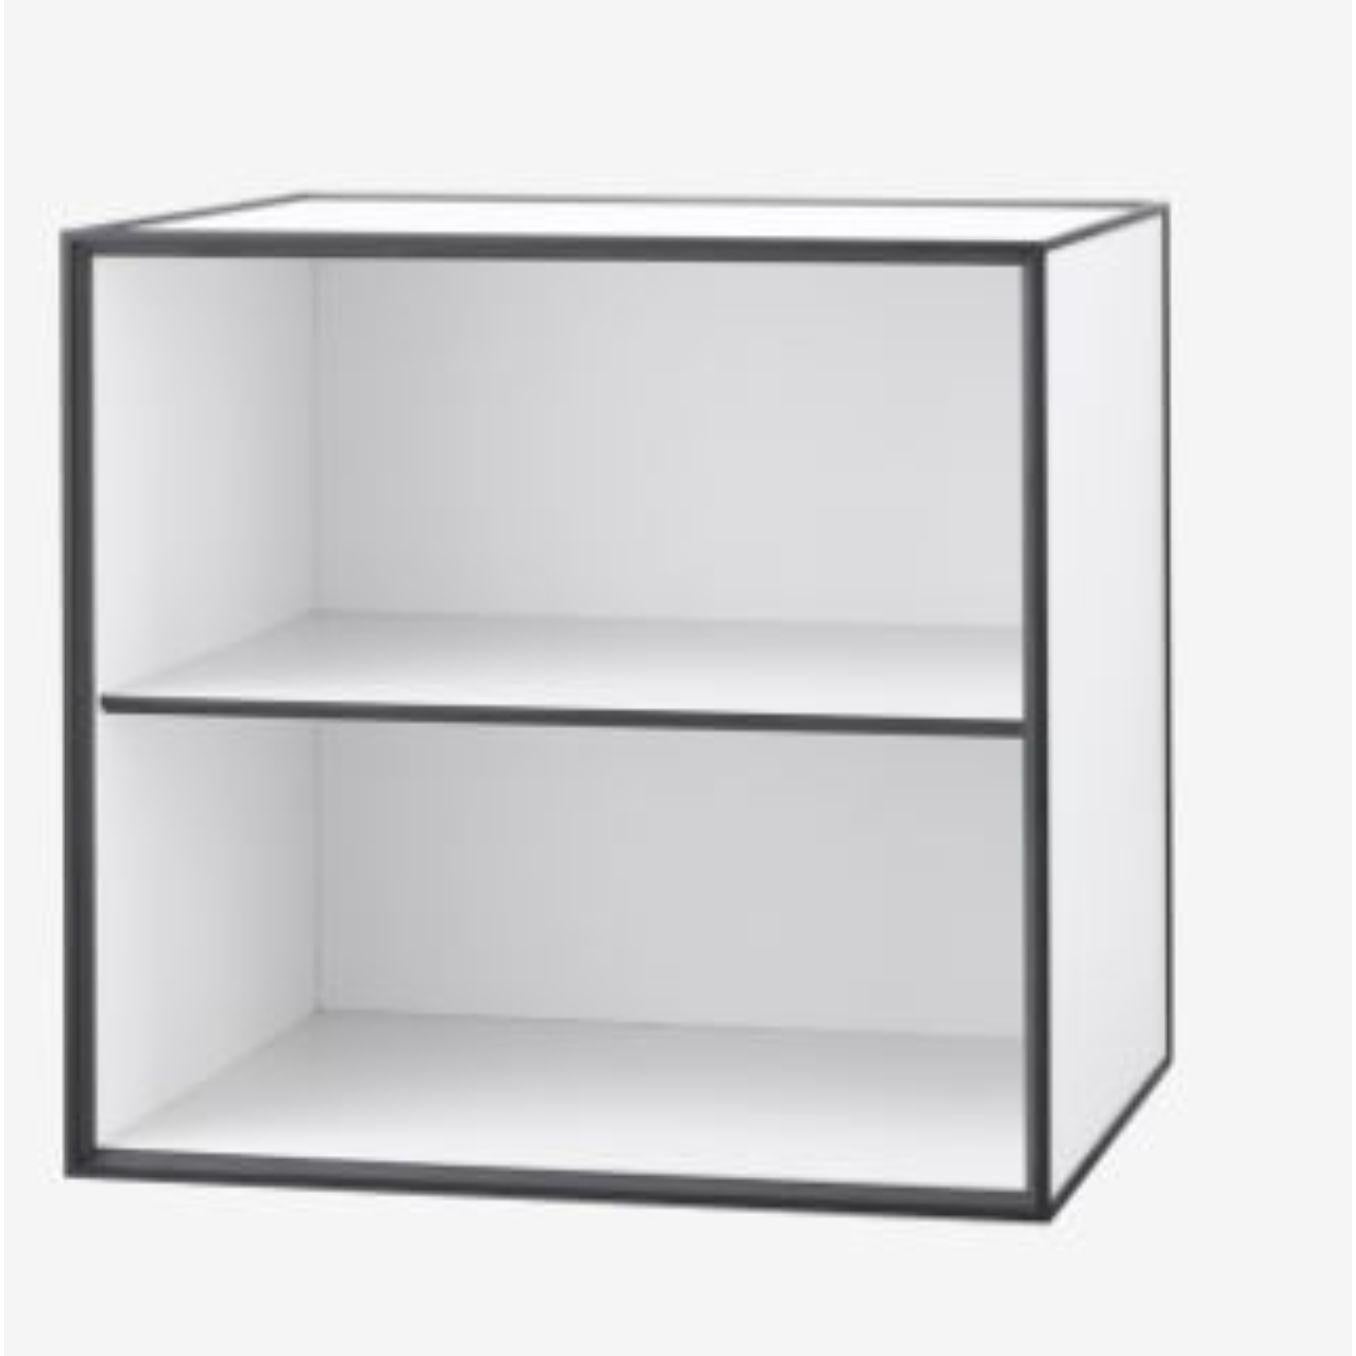 49 White frame box with shelf by Lassen
Dimensions: D 49 x W 42 x H 49 cm 
Materials: finér, melamin, melamin, melamine, metal, veneer, ash.
Also available in different colours and dimensions. 
Weight: 14 Kg.


By Lassen is a Danish design